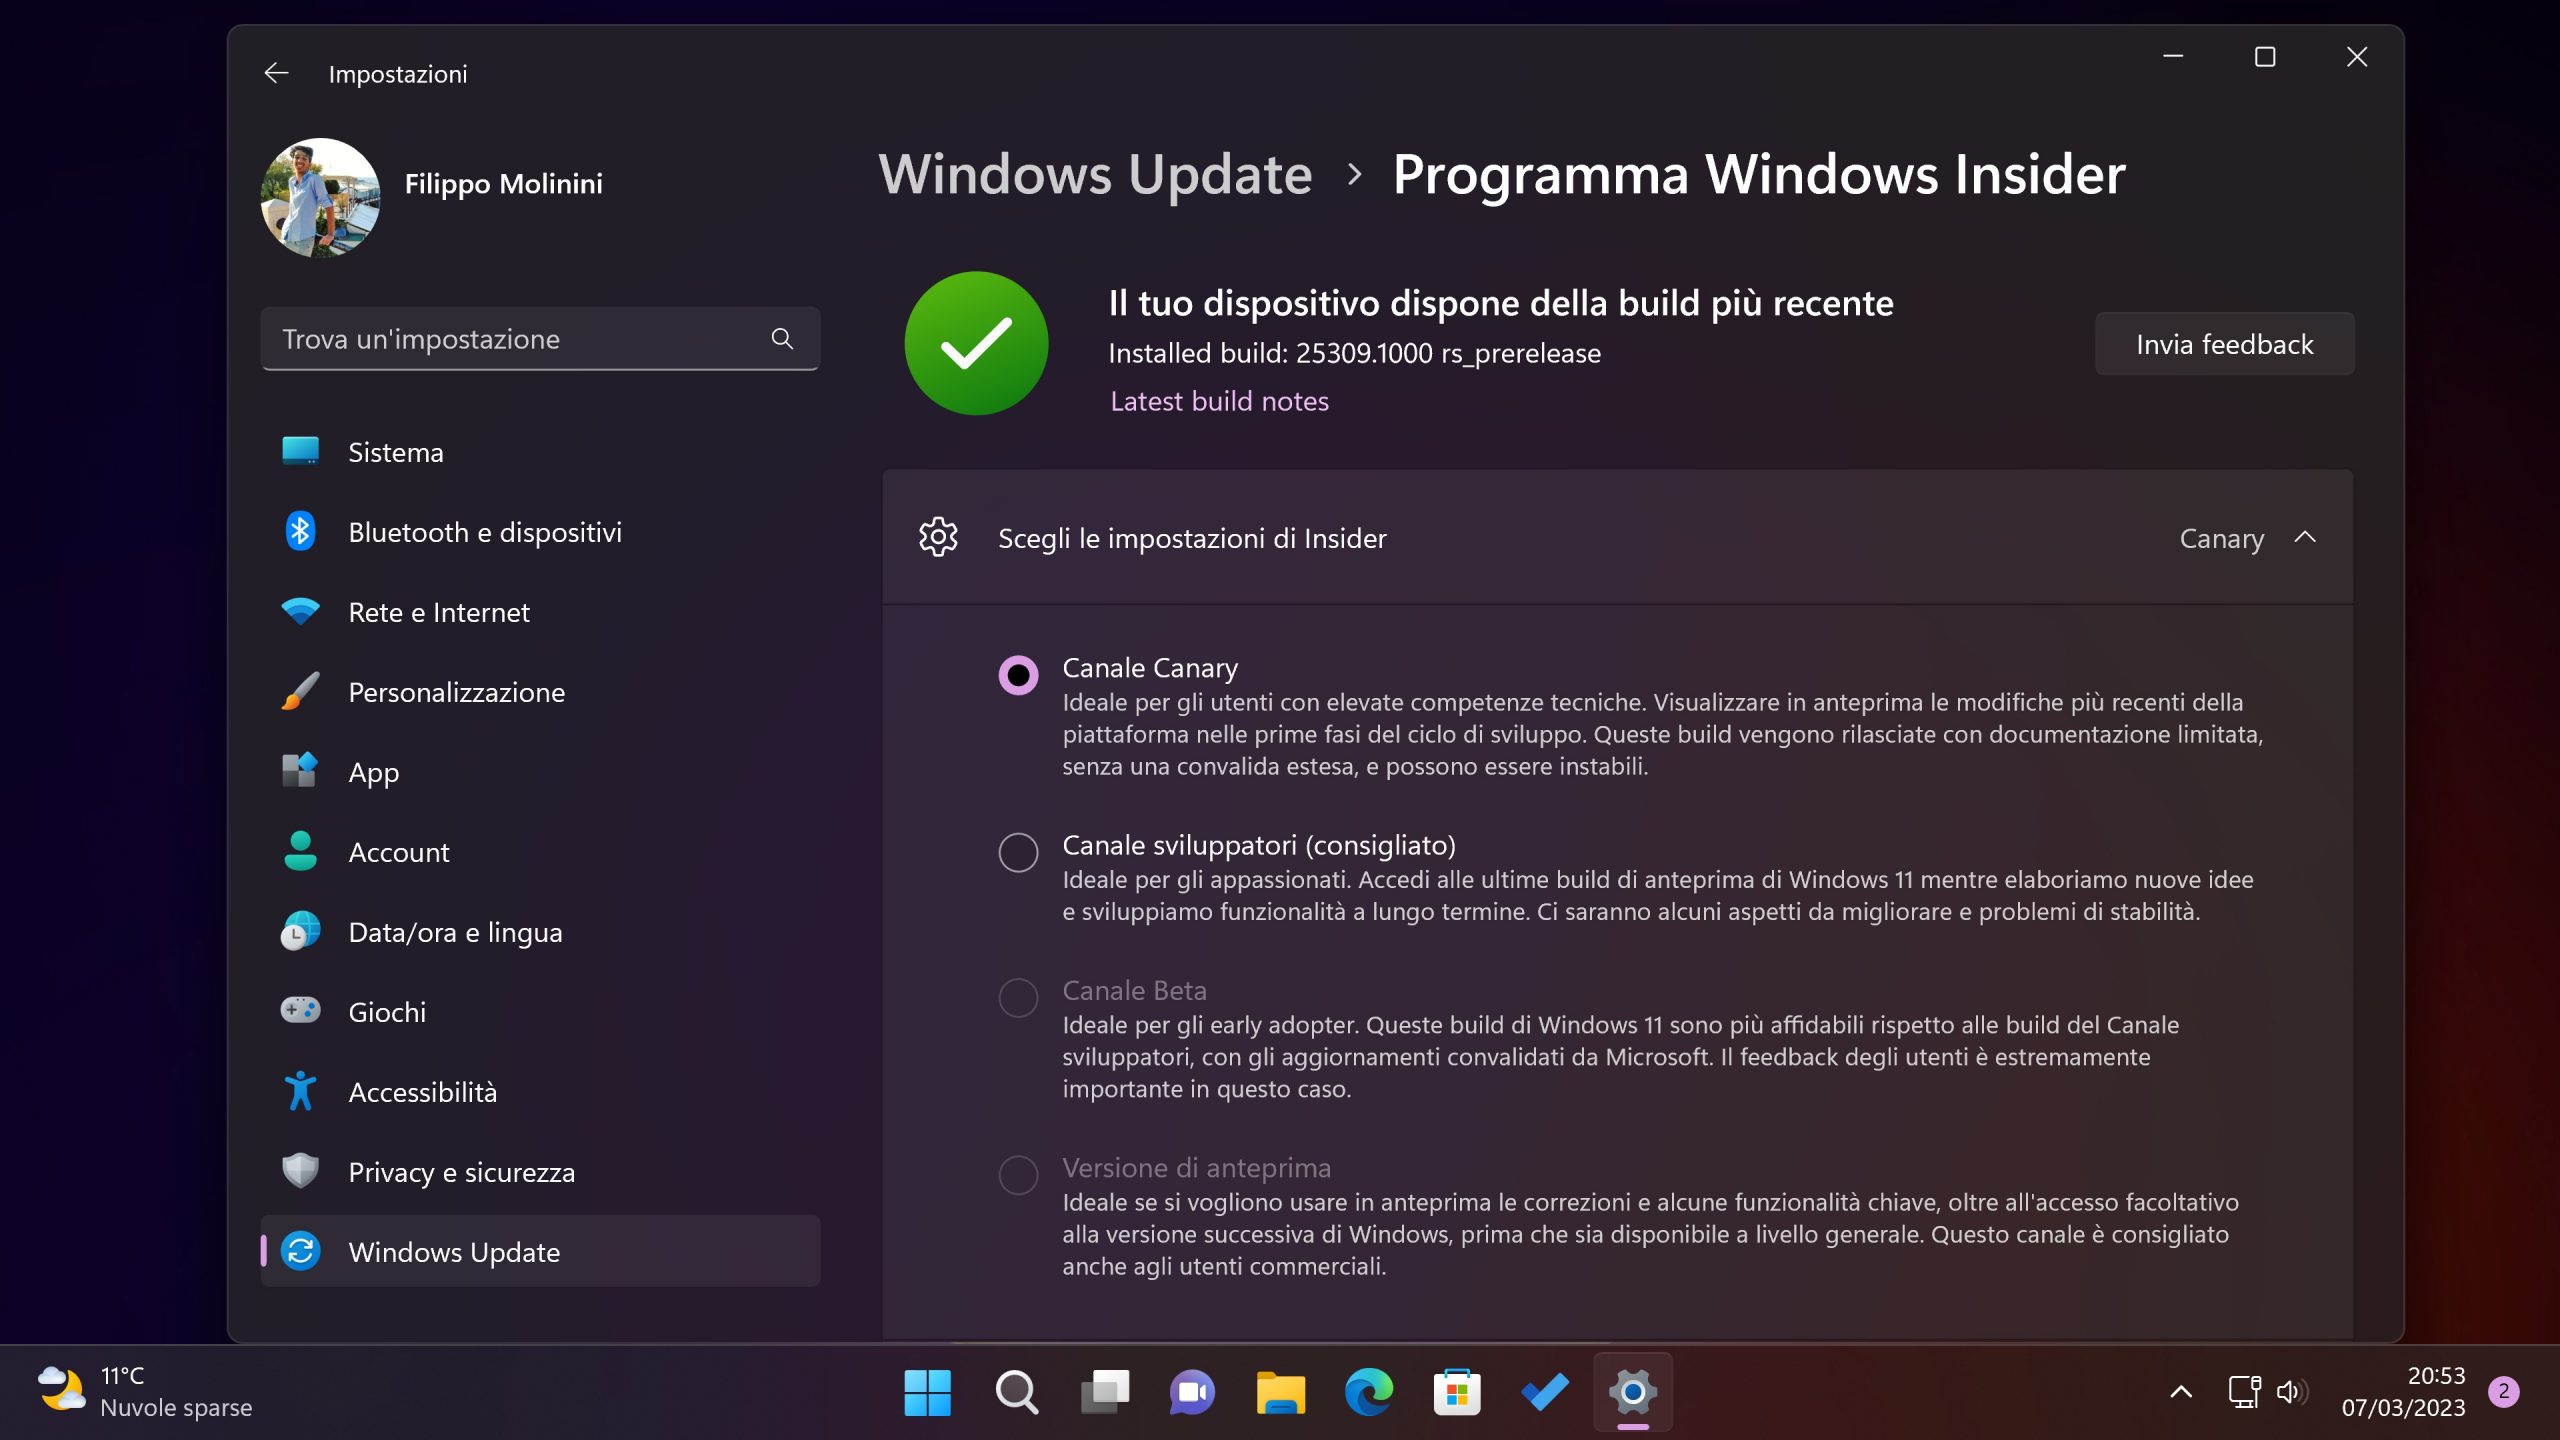 Windows Insider - Canale Canary